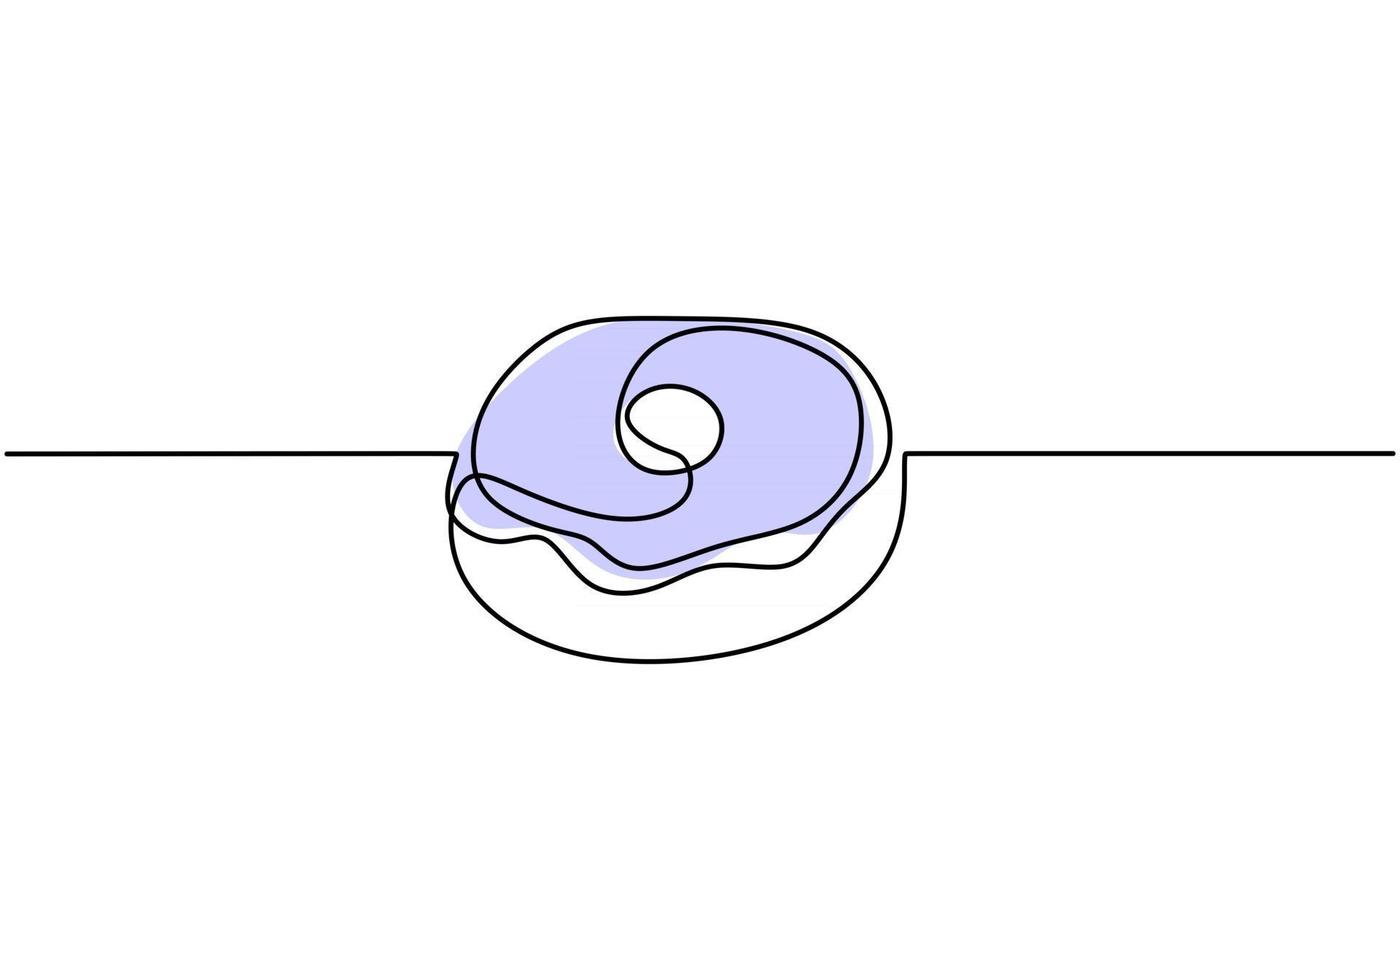 Single continuous line of Big blue donuts. Big blue donuts in one line style isolated on white background. vector